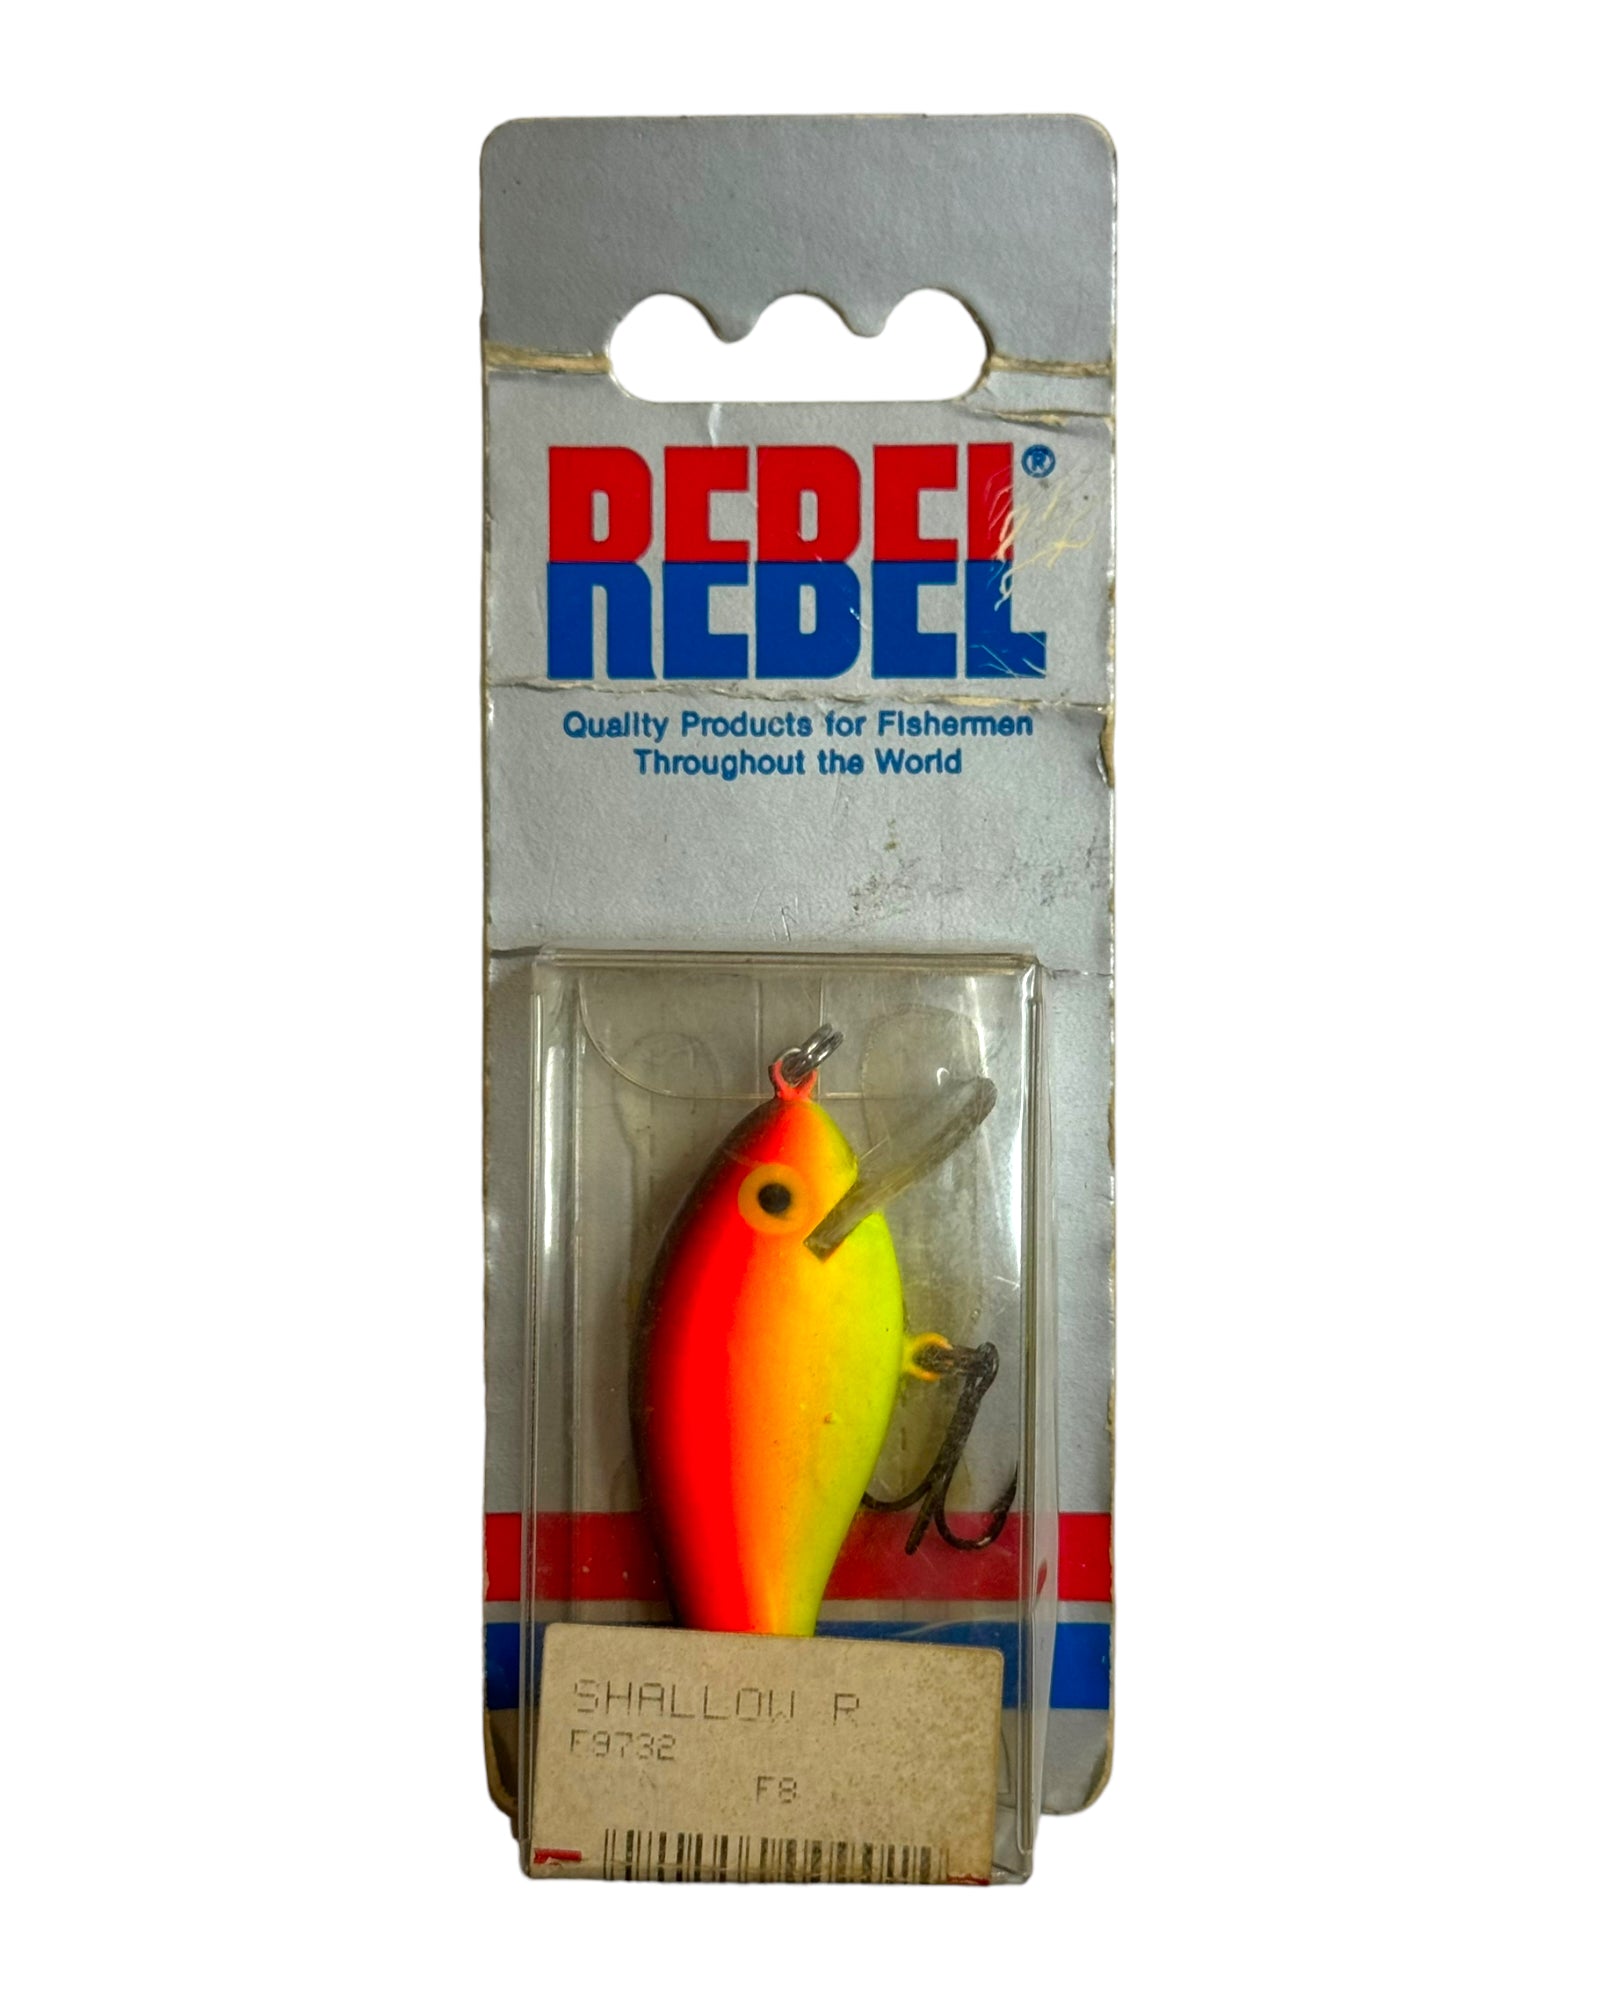 Rare REBEL LURES SHALLOW R SHALLOW Fishing Lure • F9732 – Toad Tackle